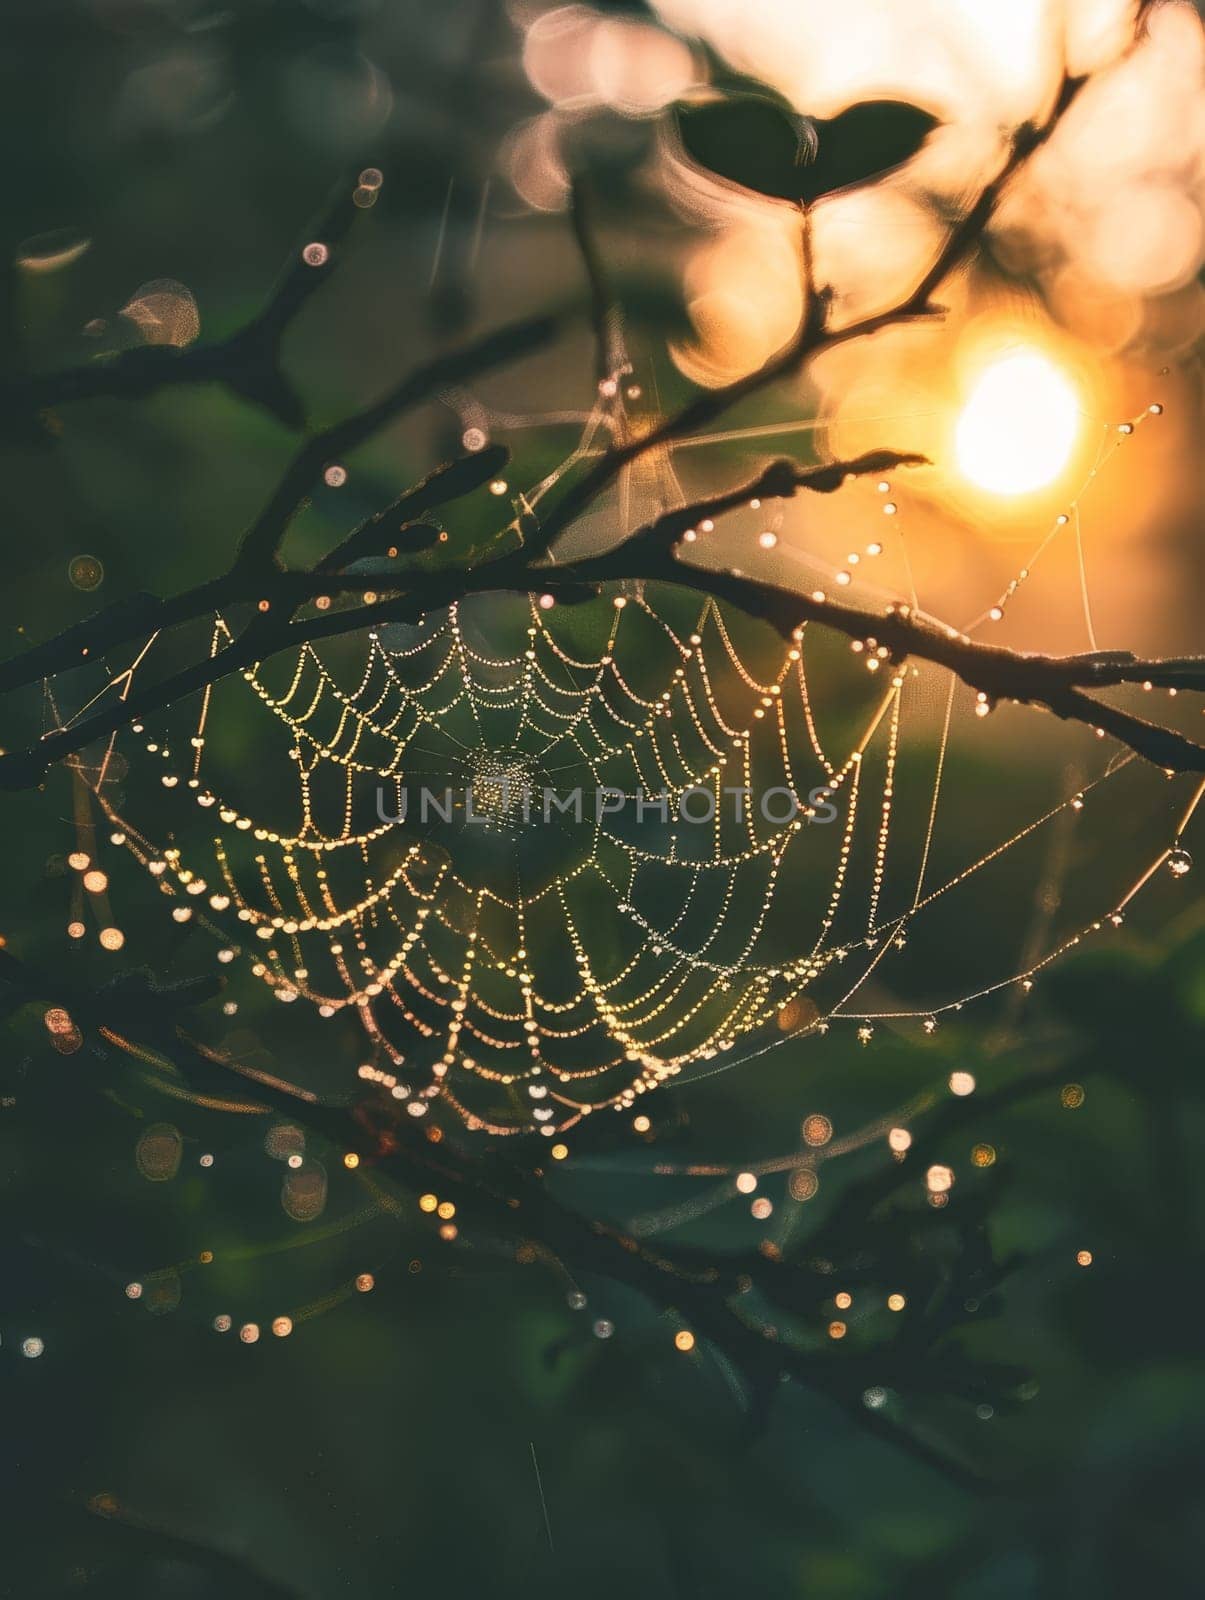 Morning dew clings to the delicate strands of a spiderweb, illuminated by a golden sunrise that infuses the scene with warmth.. by sfinks